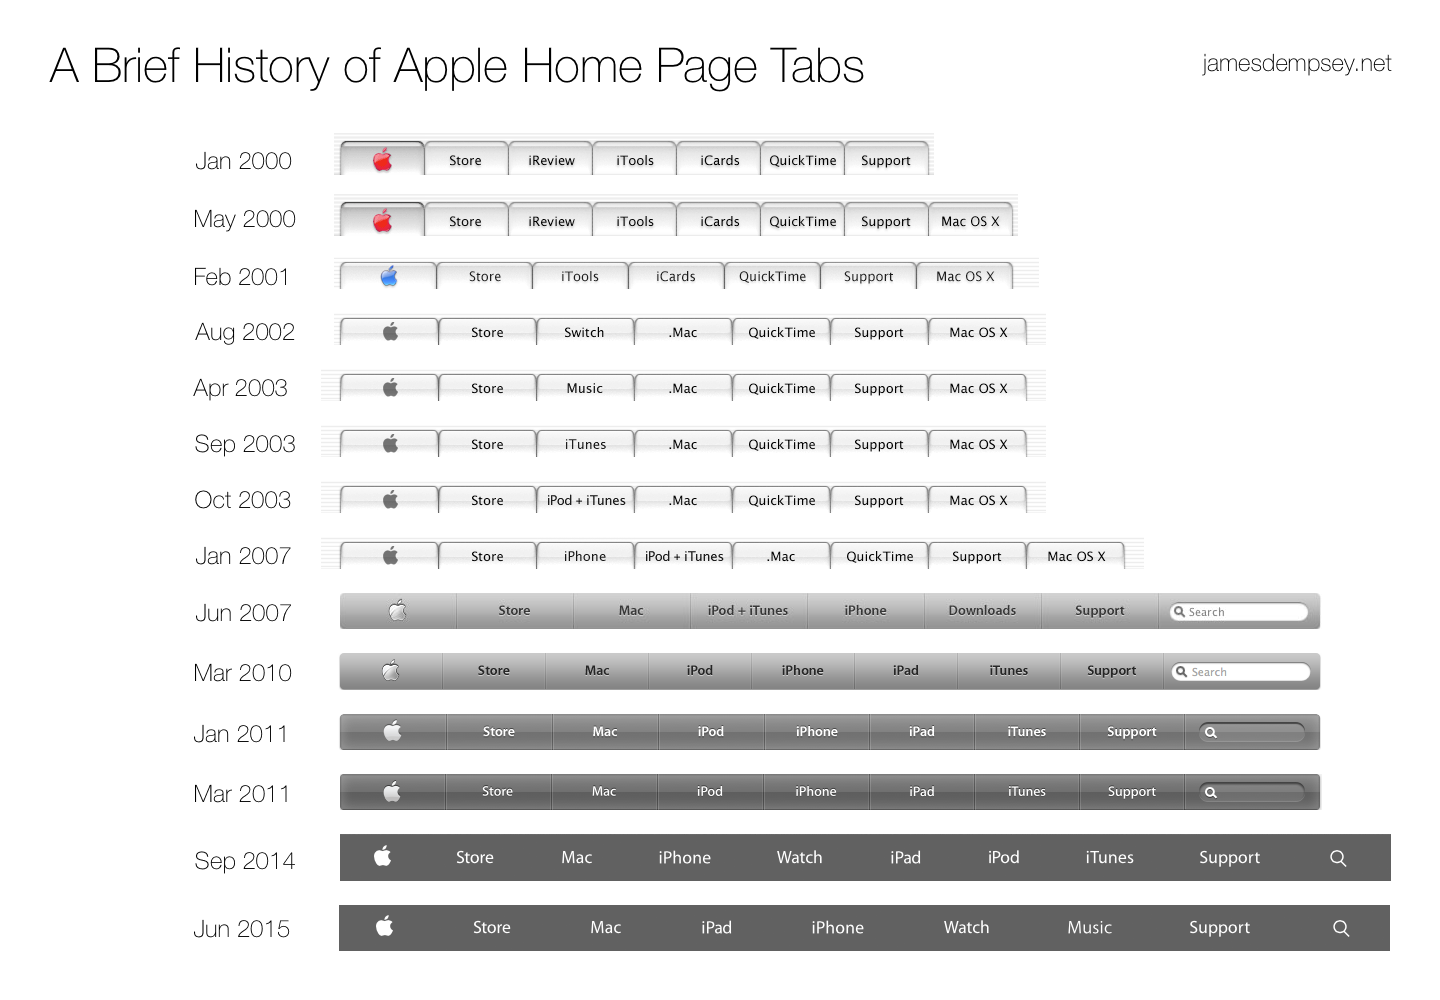 Image of Apple Home Page Tabs